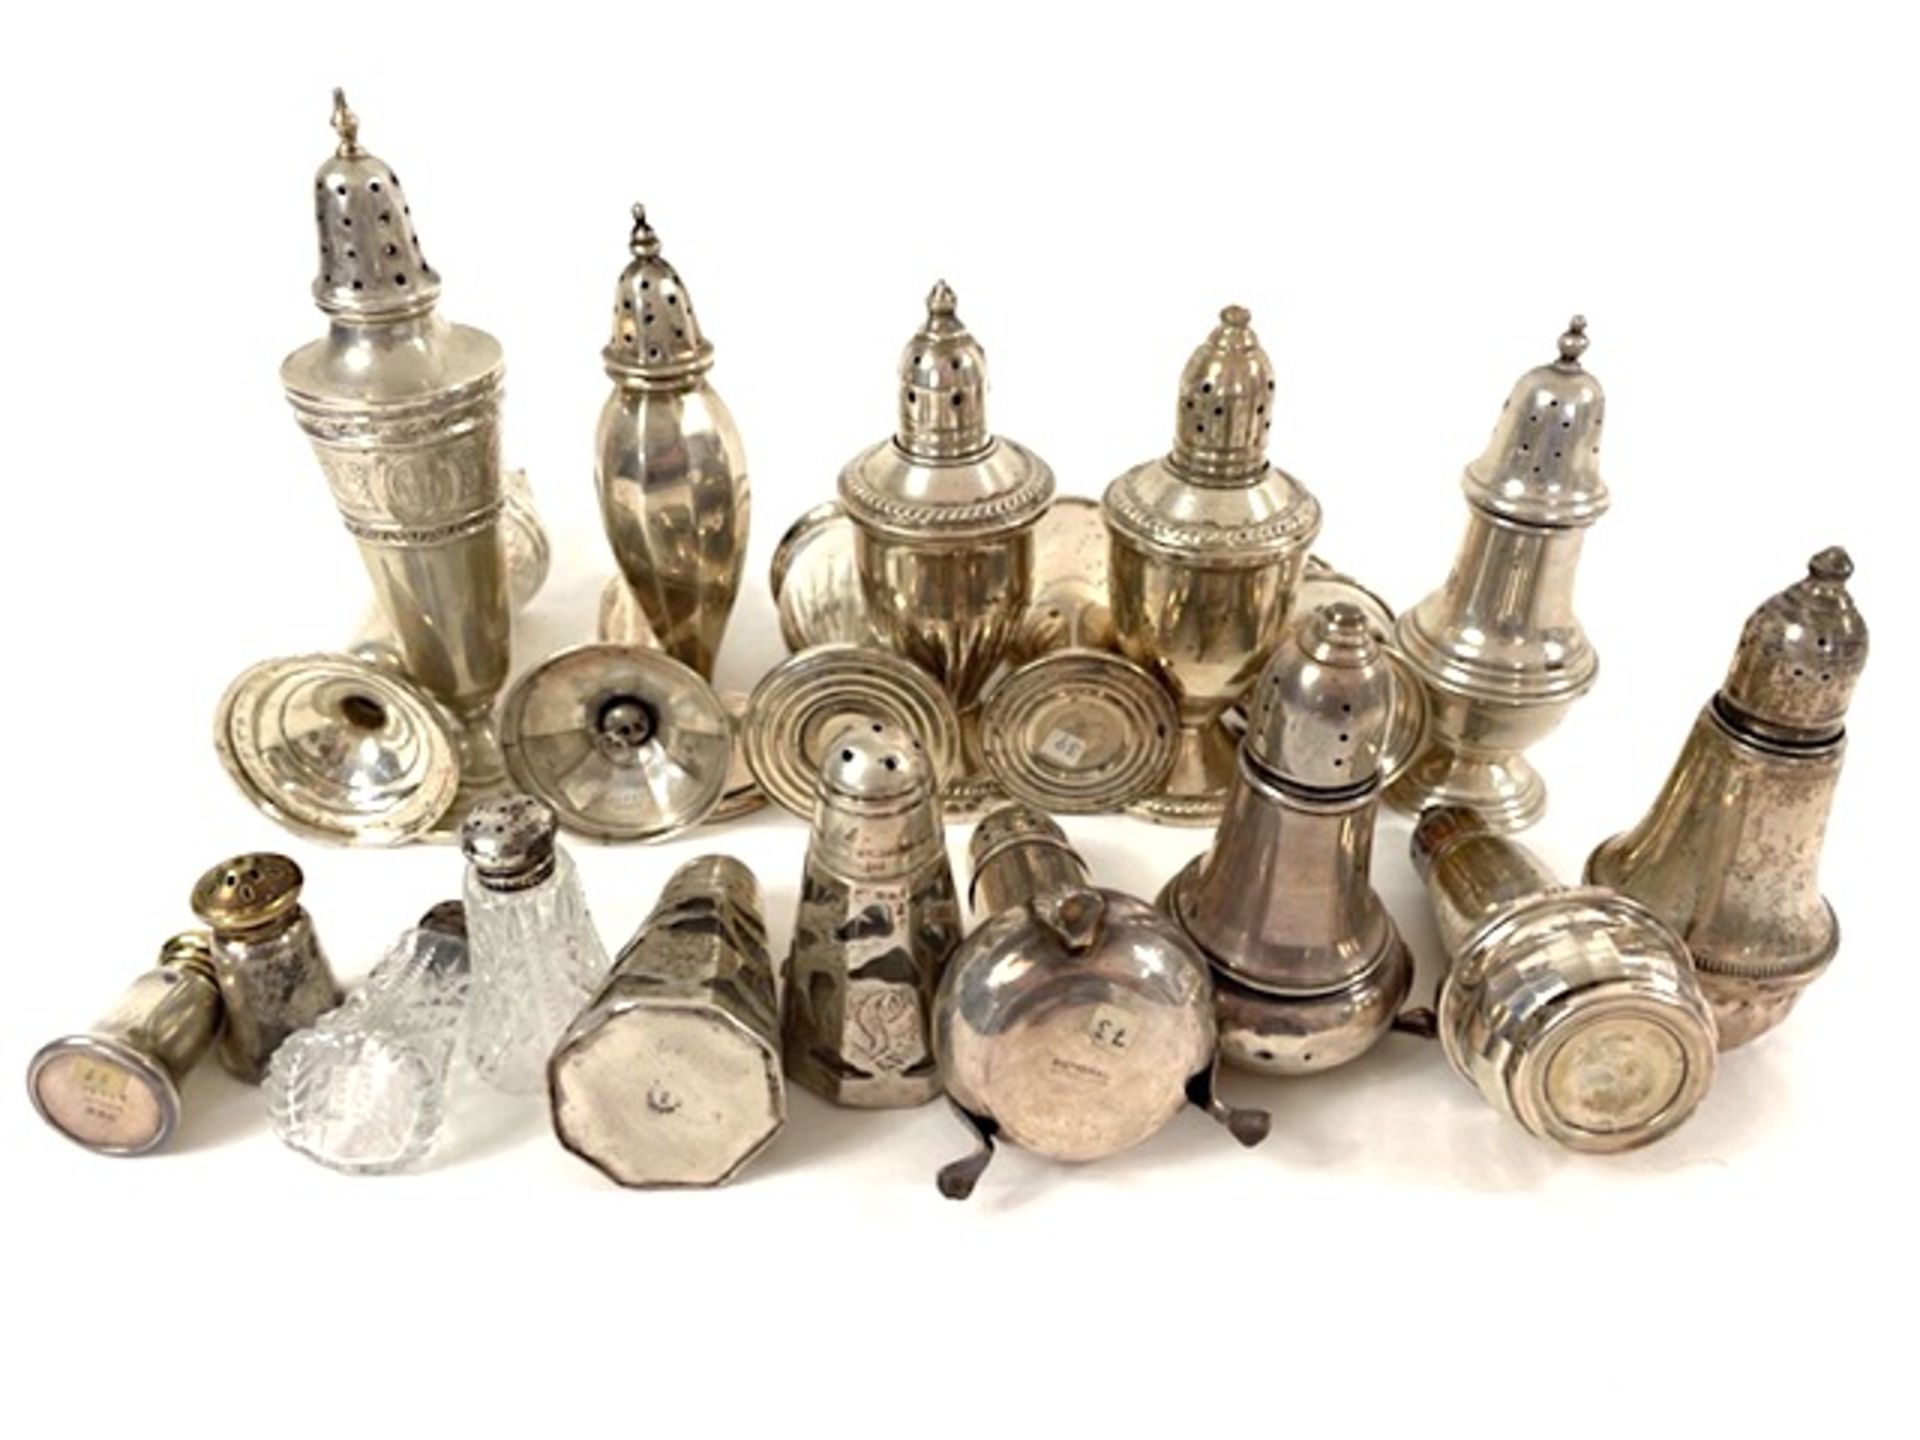 40 pairs of salt/pepper and spice shakers, - Image 88 of 88